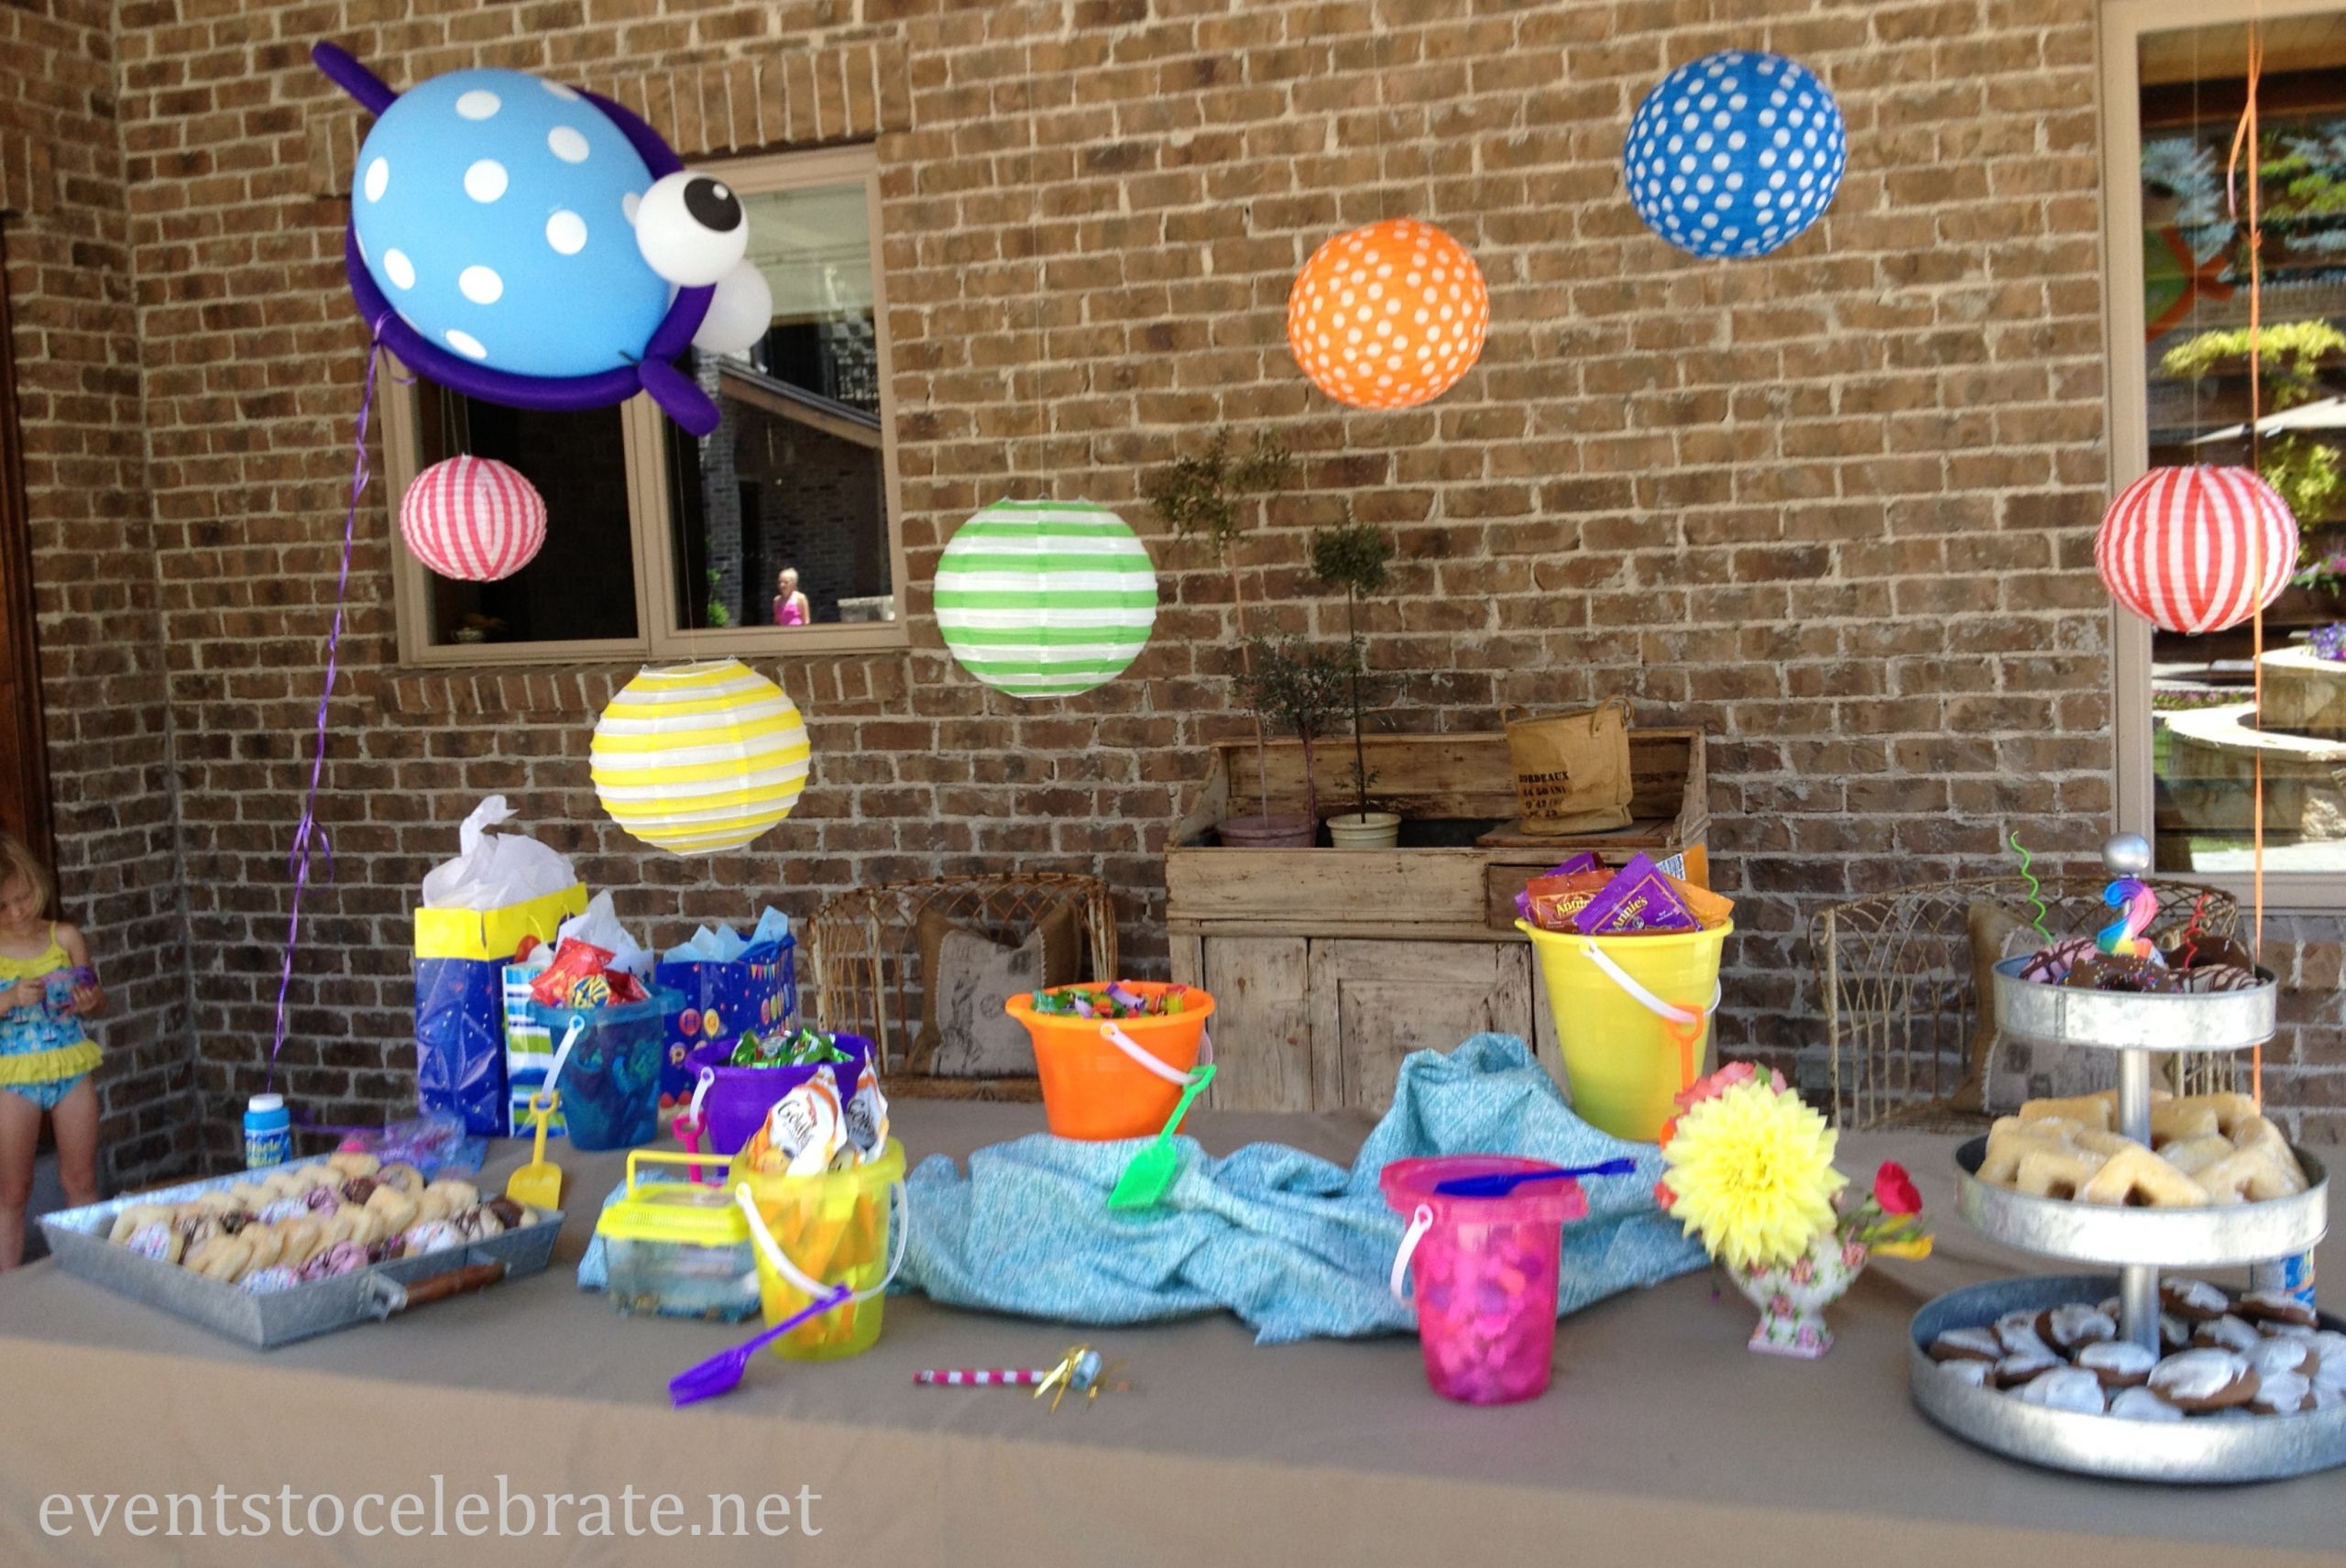 Swim Pool Party Ideas
 beach balls Archives events to CELEBRATE